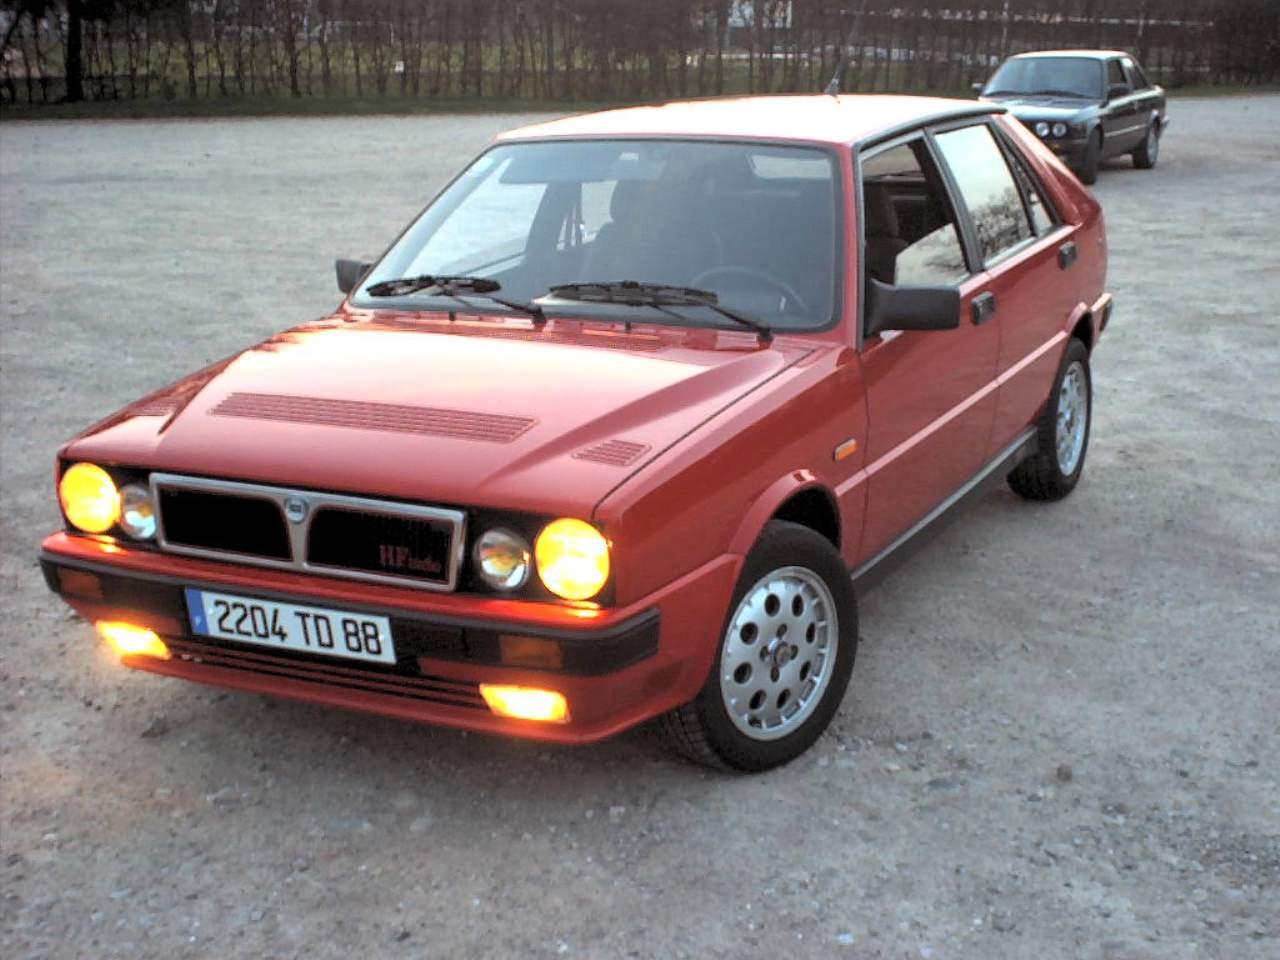 Photos: Car: Lancia Delta 1600 HF Turbo (pictures, images)